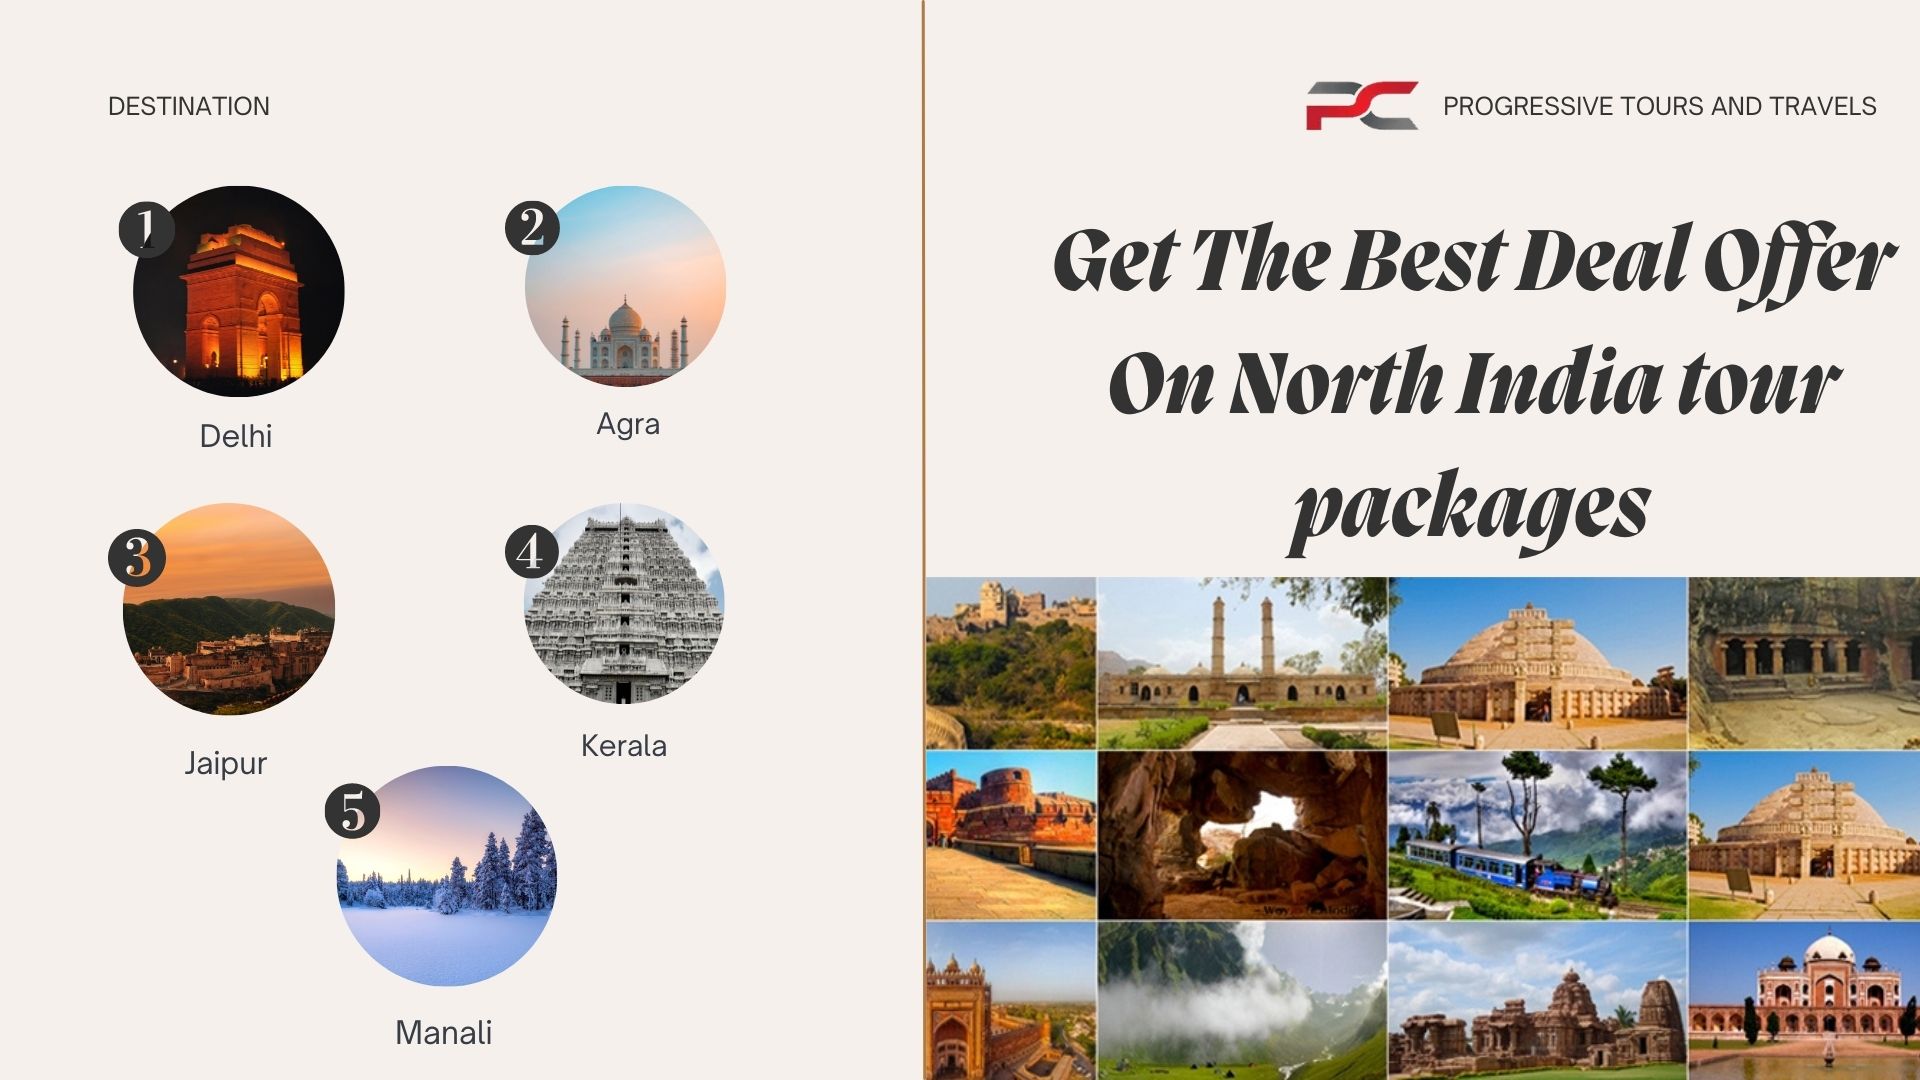 Get The Best Deal Offer On North India tour packages-3b78fbb7